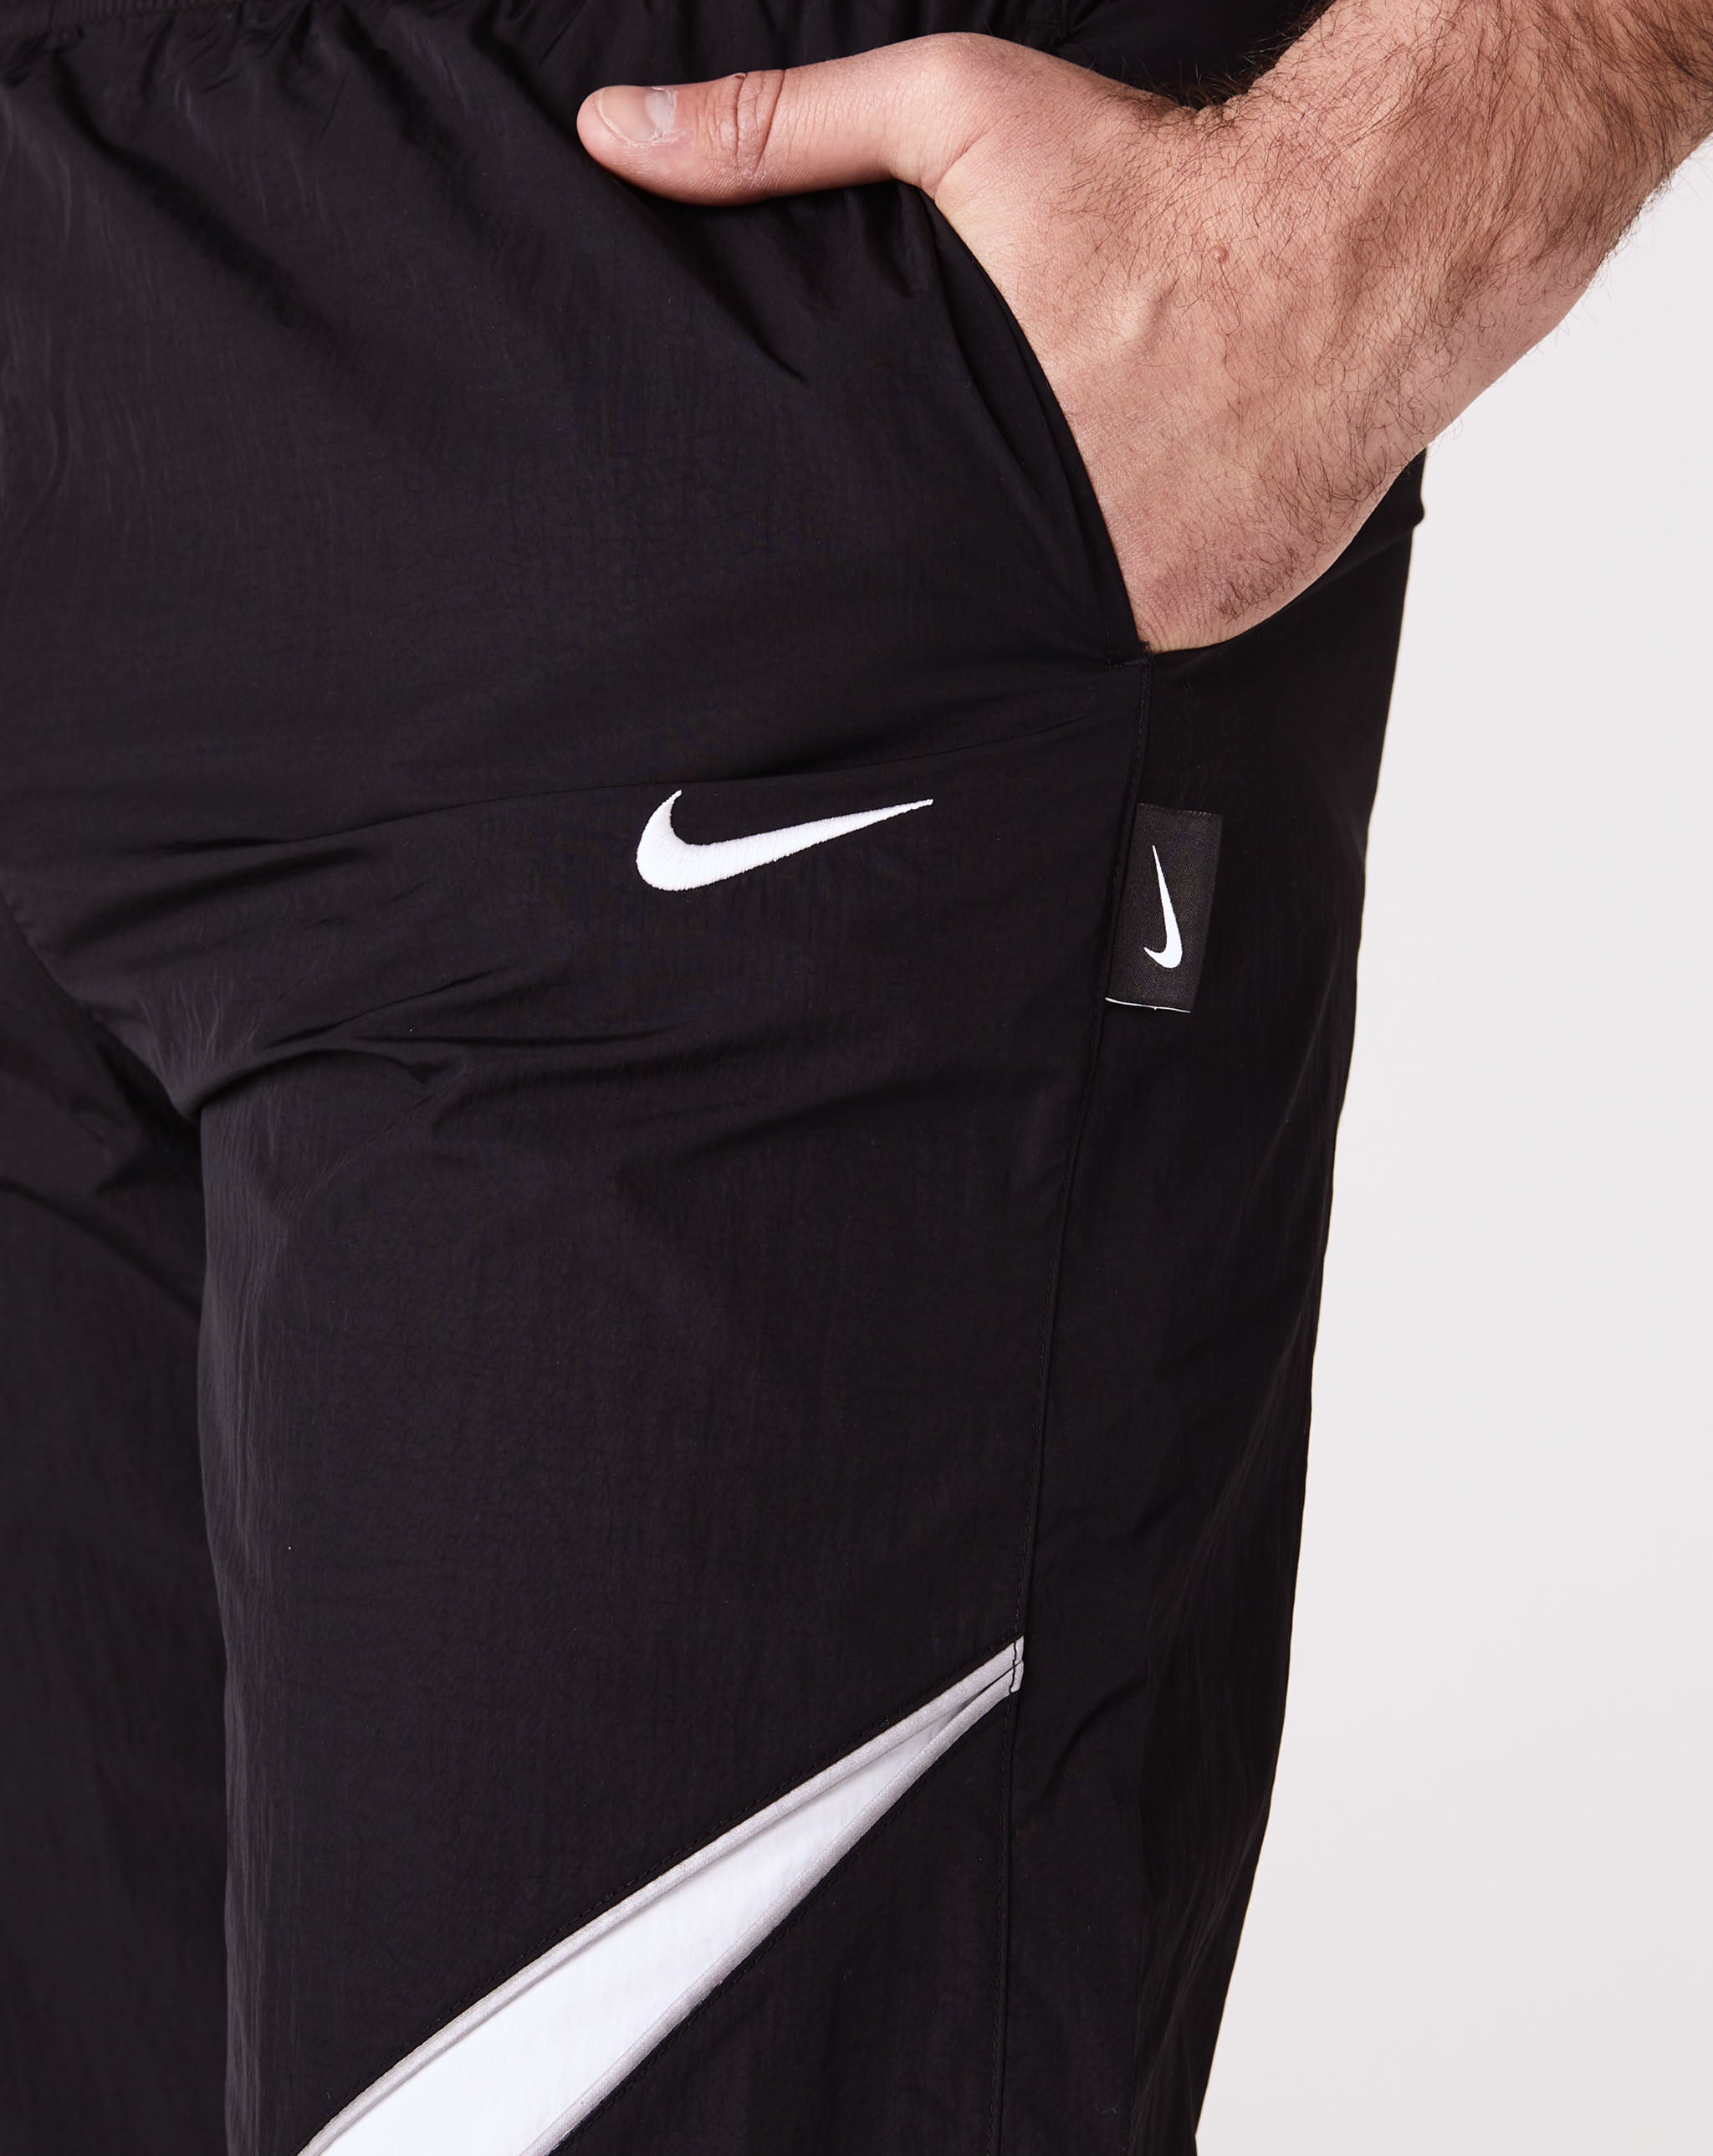 W2C Nike Solo Swoosh Track Pants? (jacket is also cool too) : r/DHgate